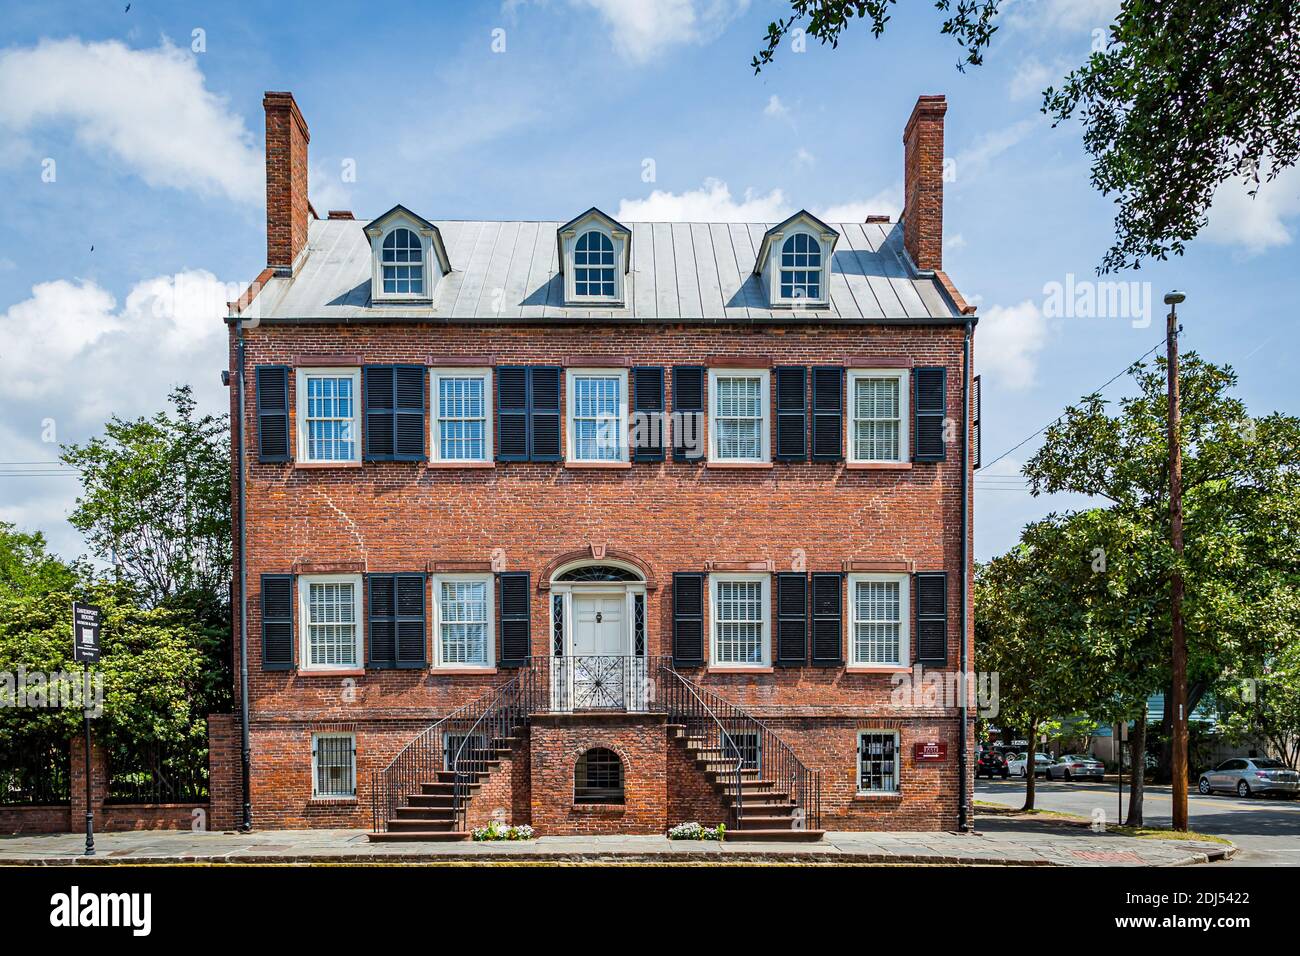 Savannah, GA / USA - April 22, 2016: The Isaiah Davenport House and Museum is located on the northwest corner of Columbia Square in Savannah, Georgia' Stock Photo